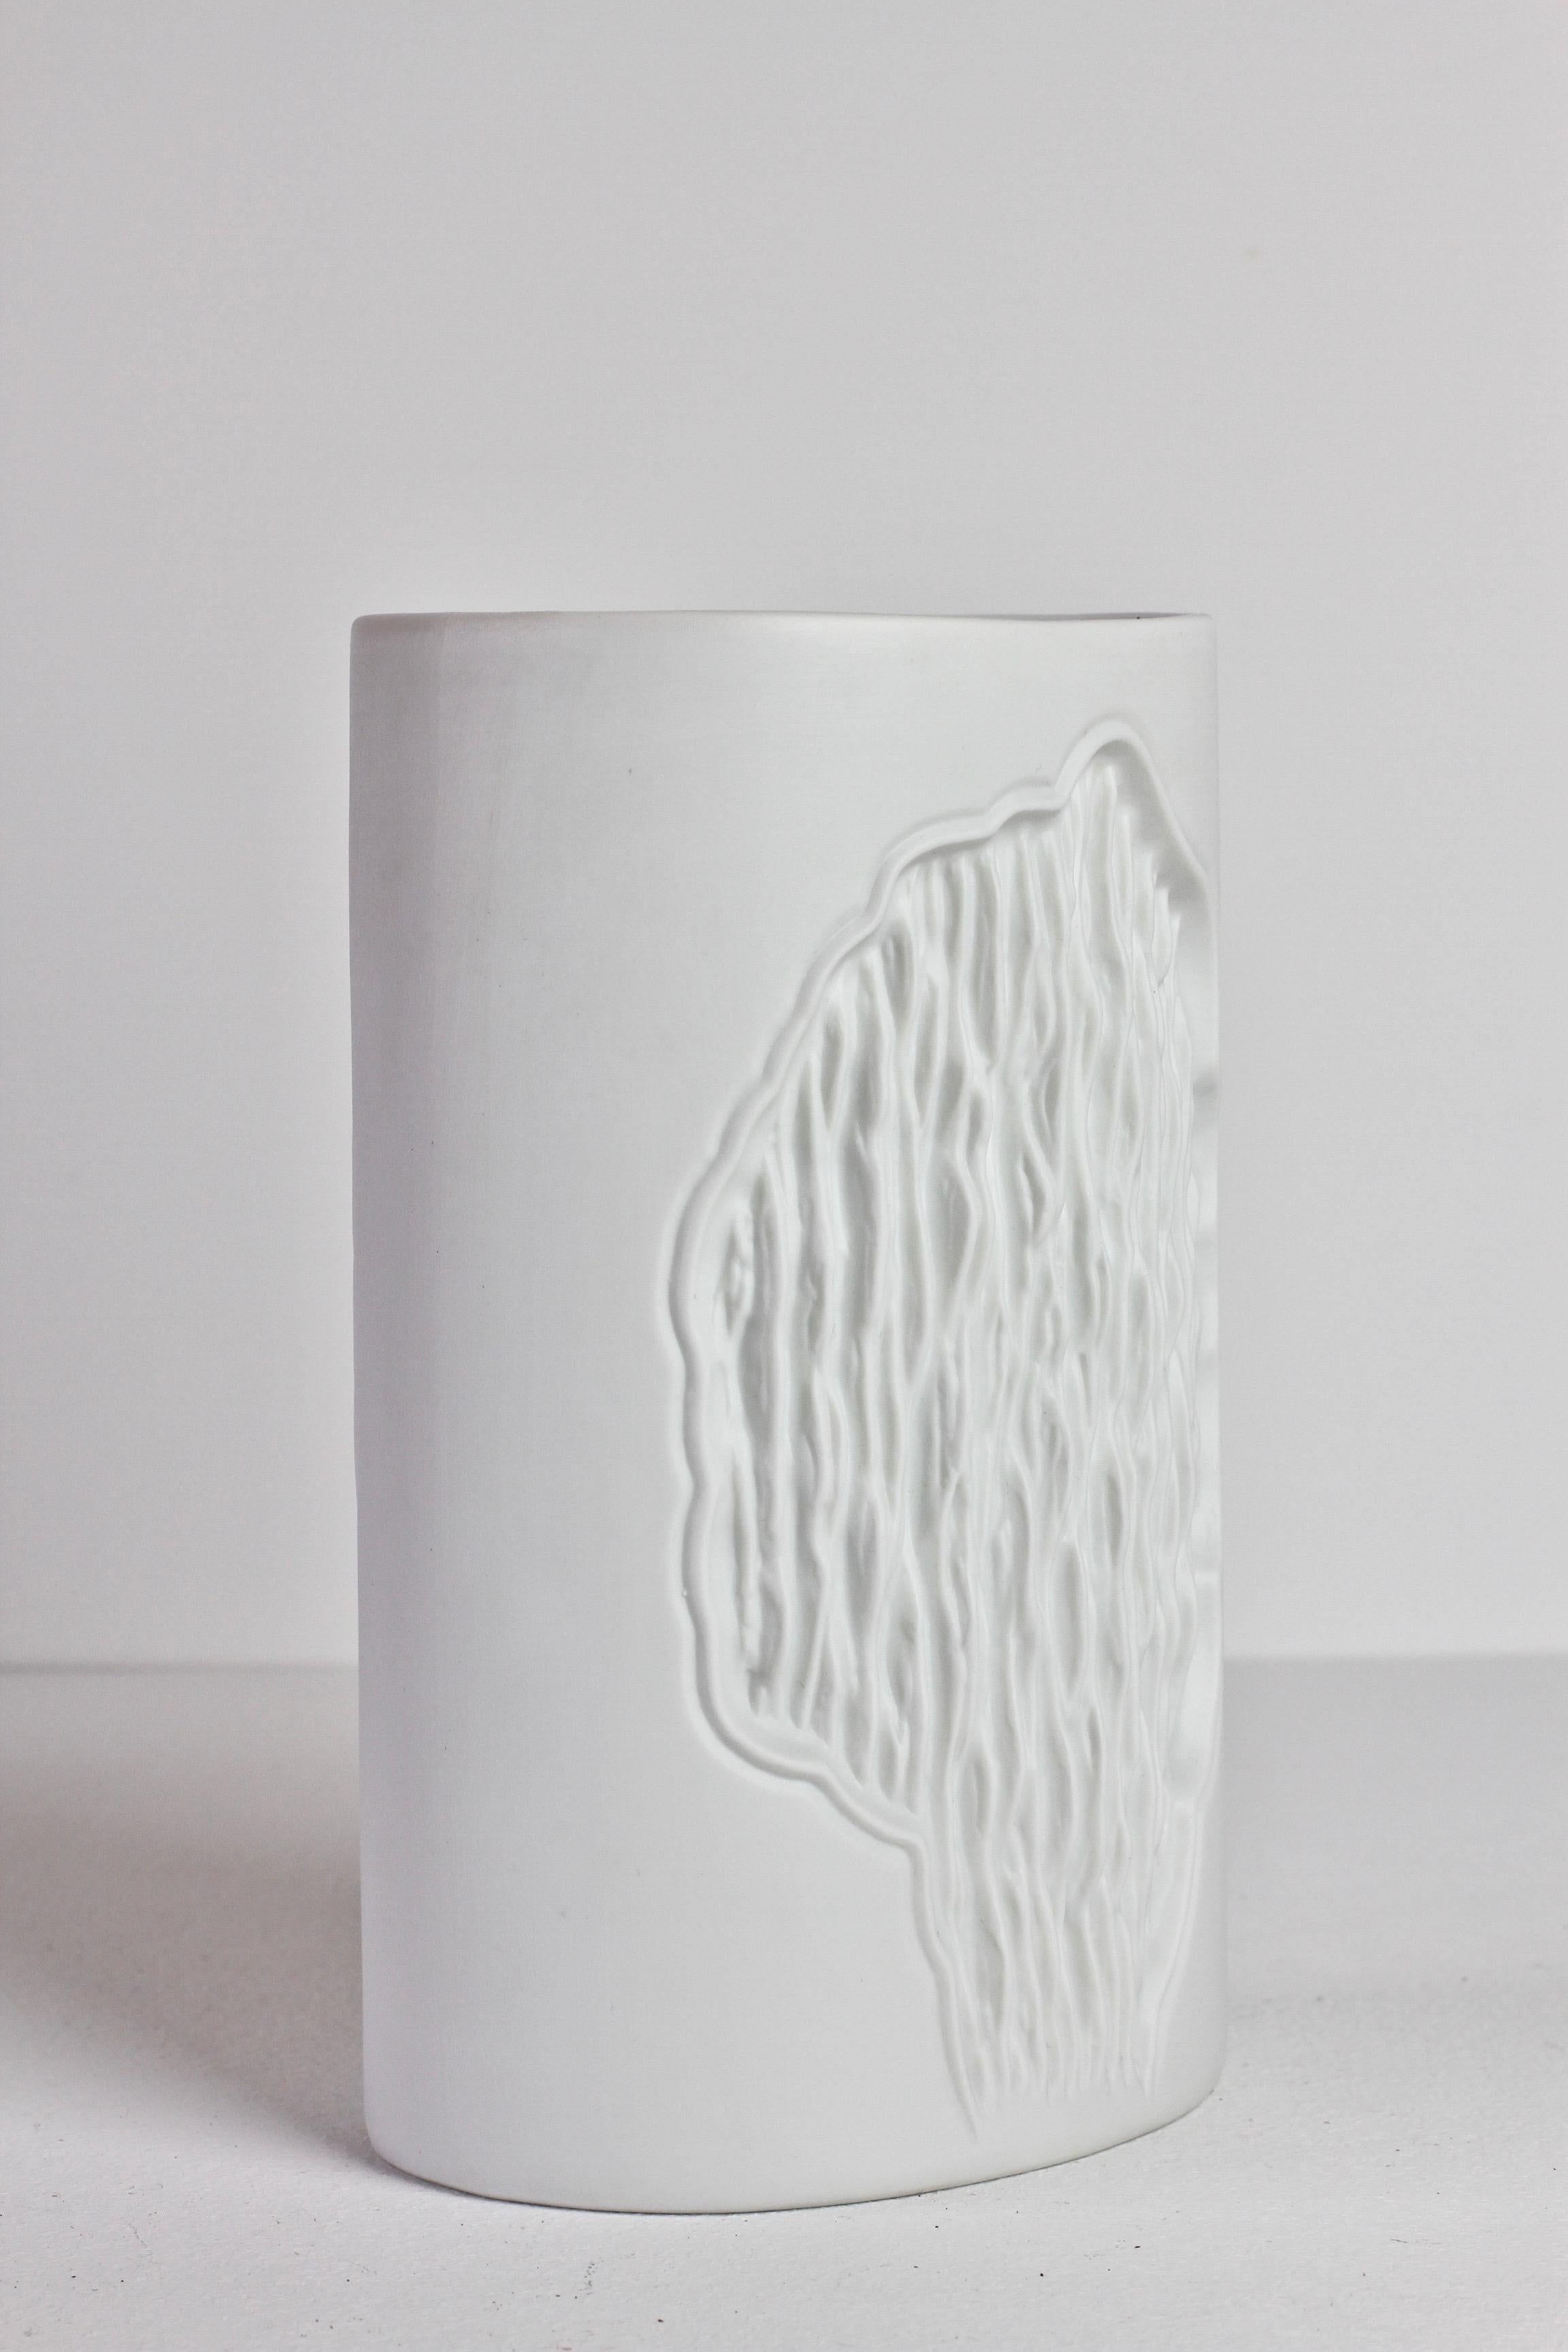 Late 20th Century Vintage White Bisque West German Vase by Manfred Frey for Kaiser Porcelain For Sale